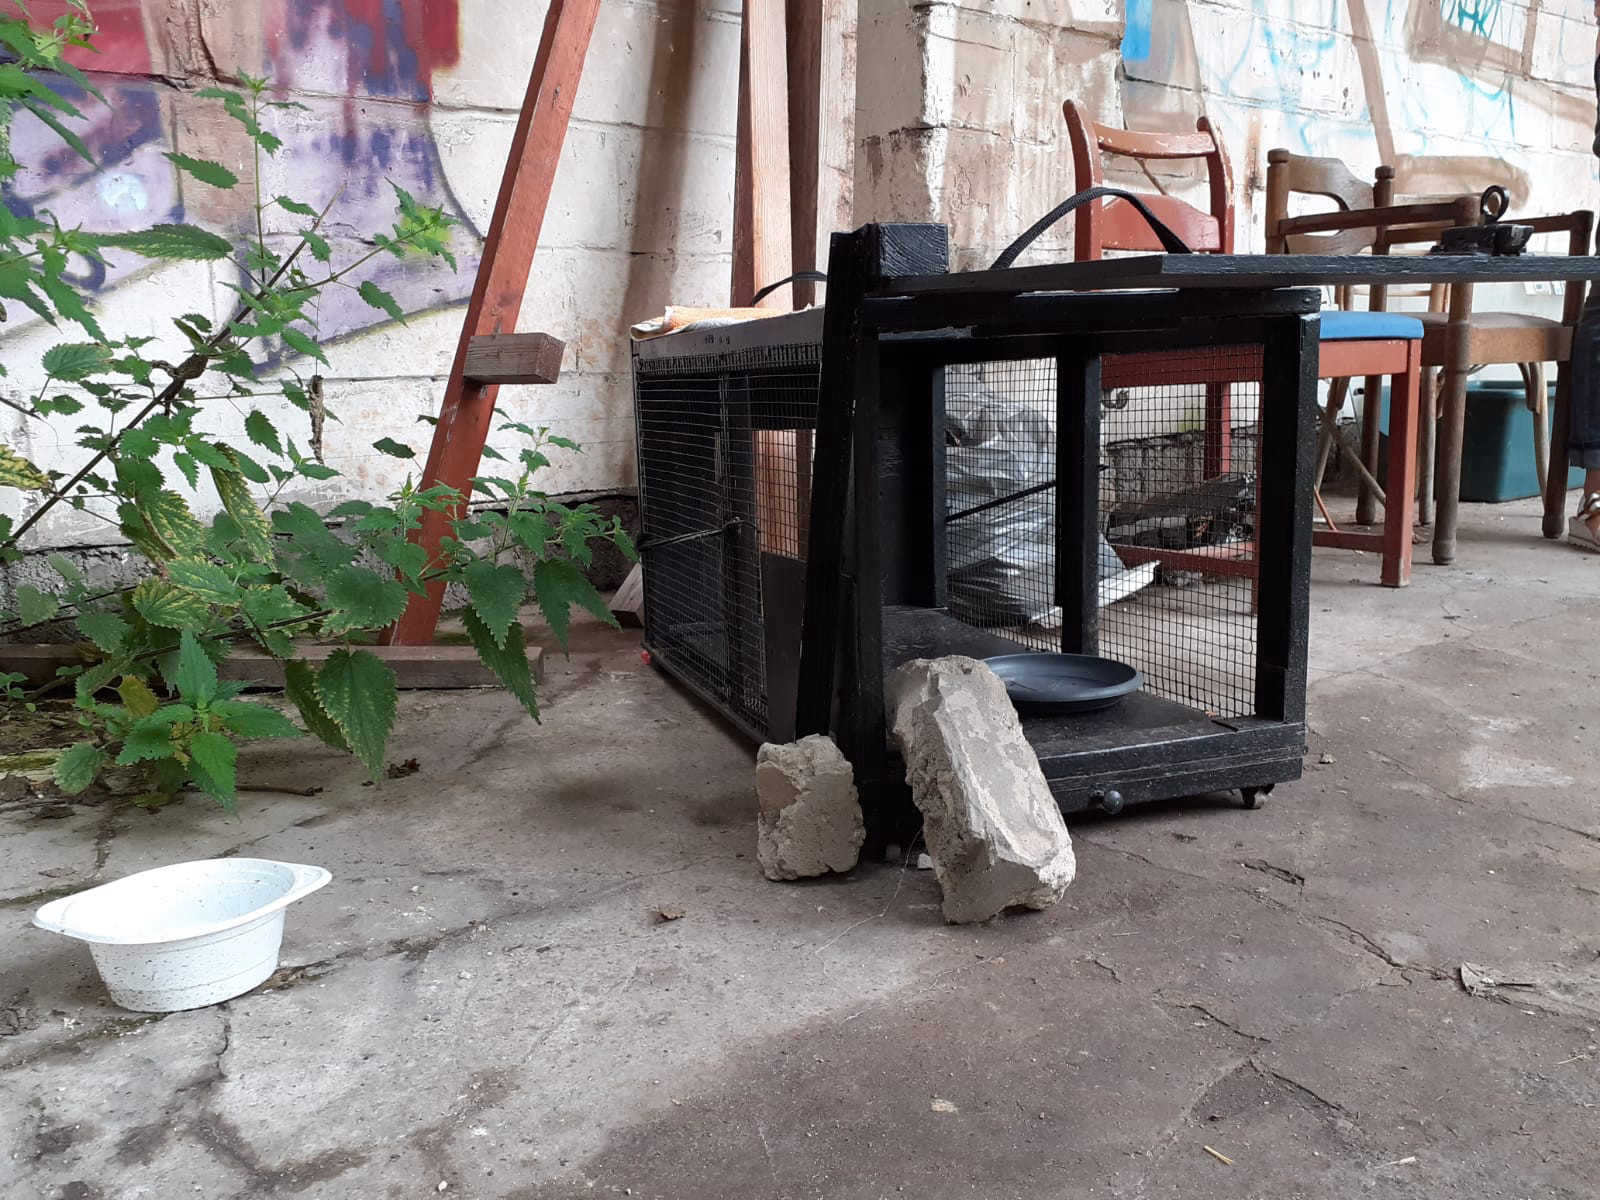 A black wooden box with a metal grate with an open hatch has been placed outside. Two stones are leaning against the box to keep it open; inside is a water bowl. In the background there are three chairs in front of a wall sprayed with graffiti.